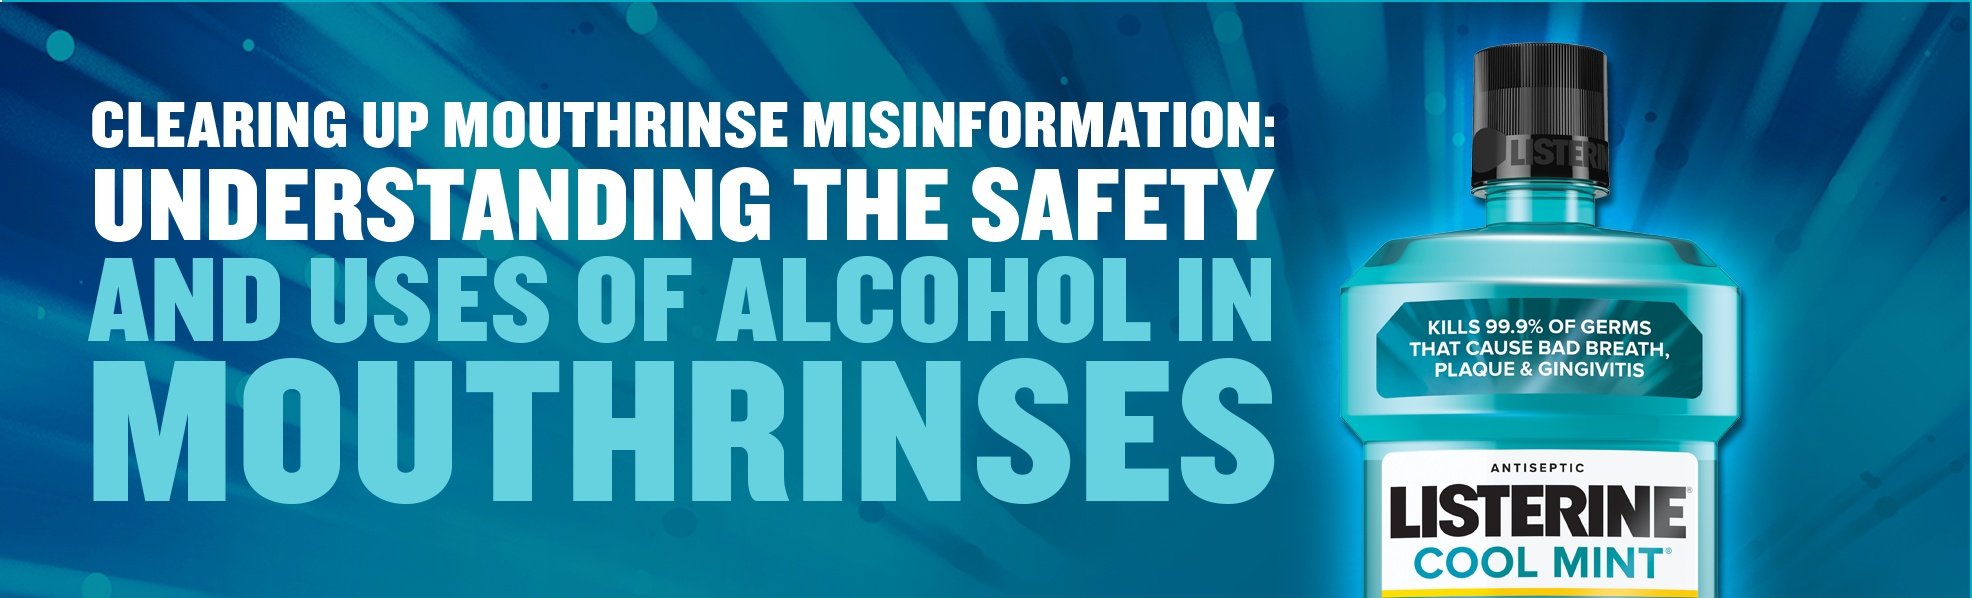 Clearing up mouthrinse misinformation on Listerine Antiseptic